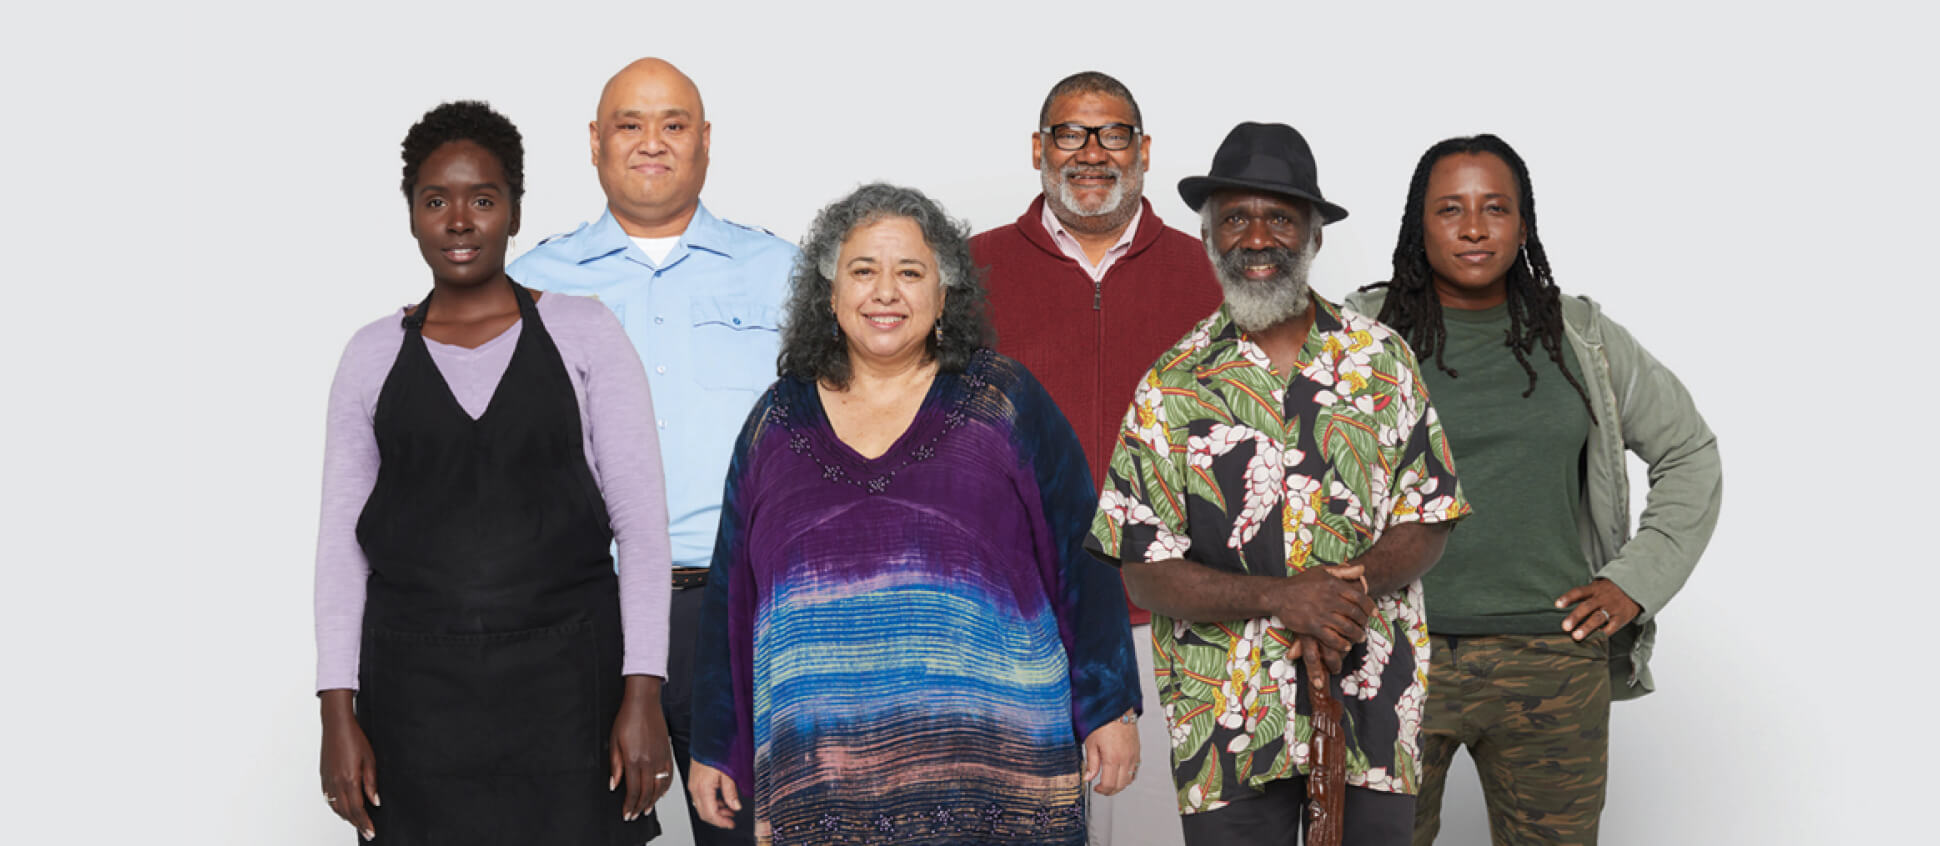 Six adults of different ages and ethnicities stand together, smiling at the camera.